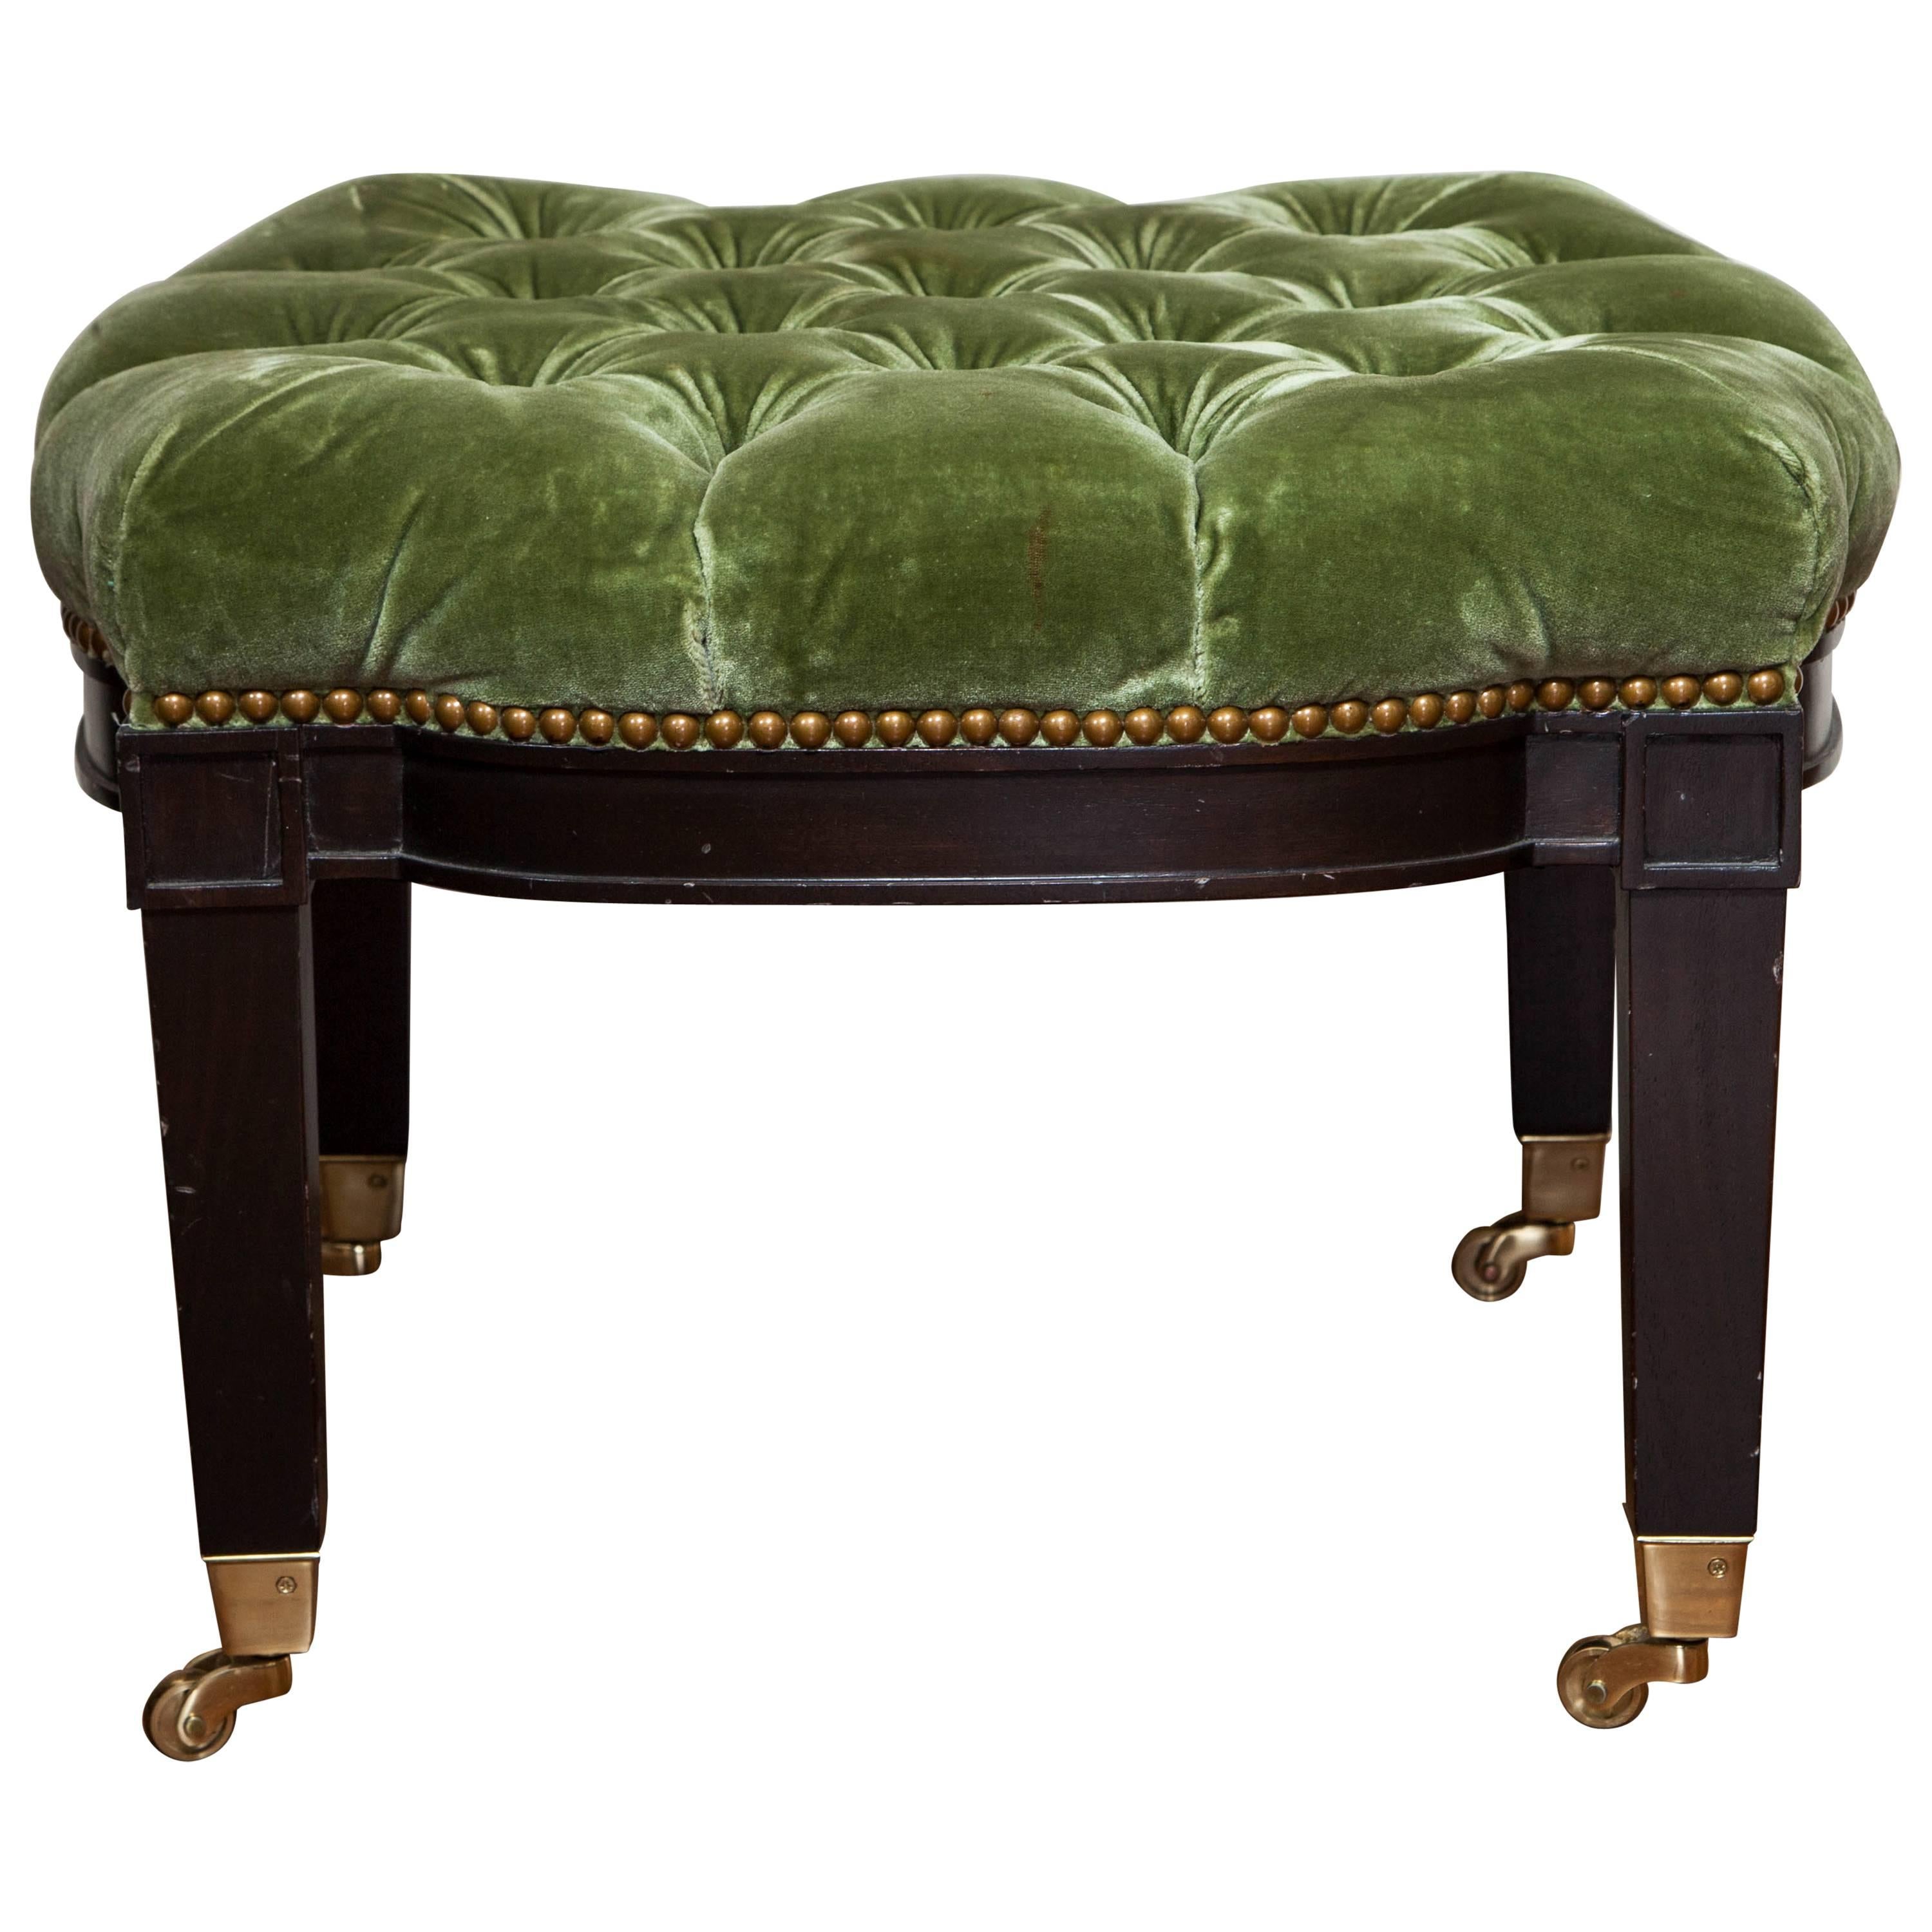 Green Tufted Ottoman on Casters